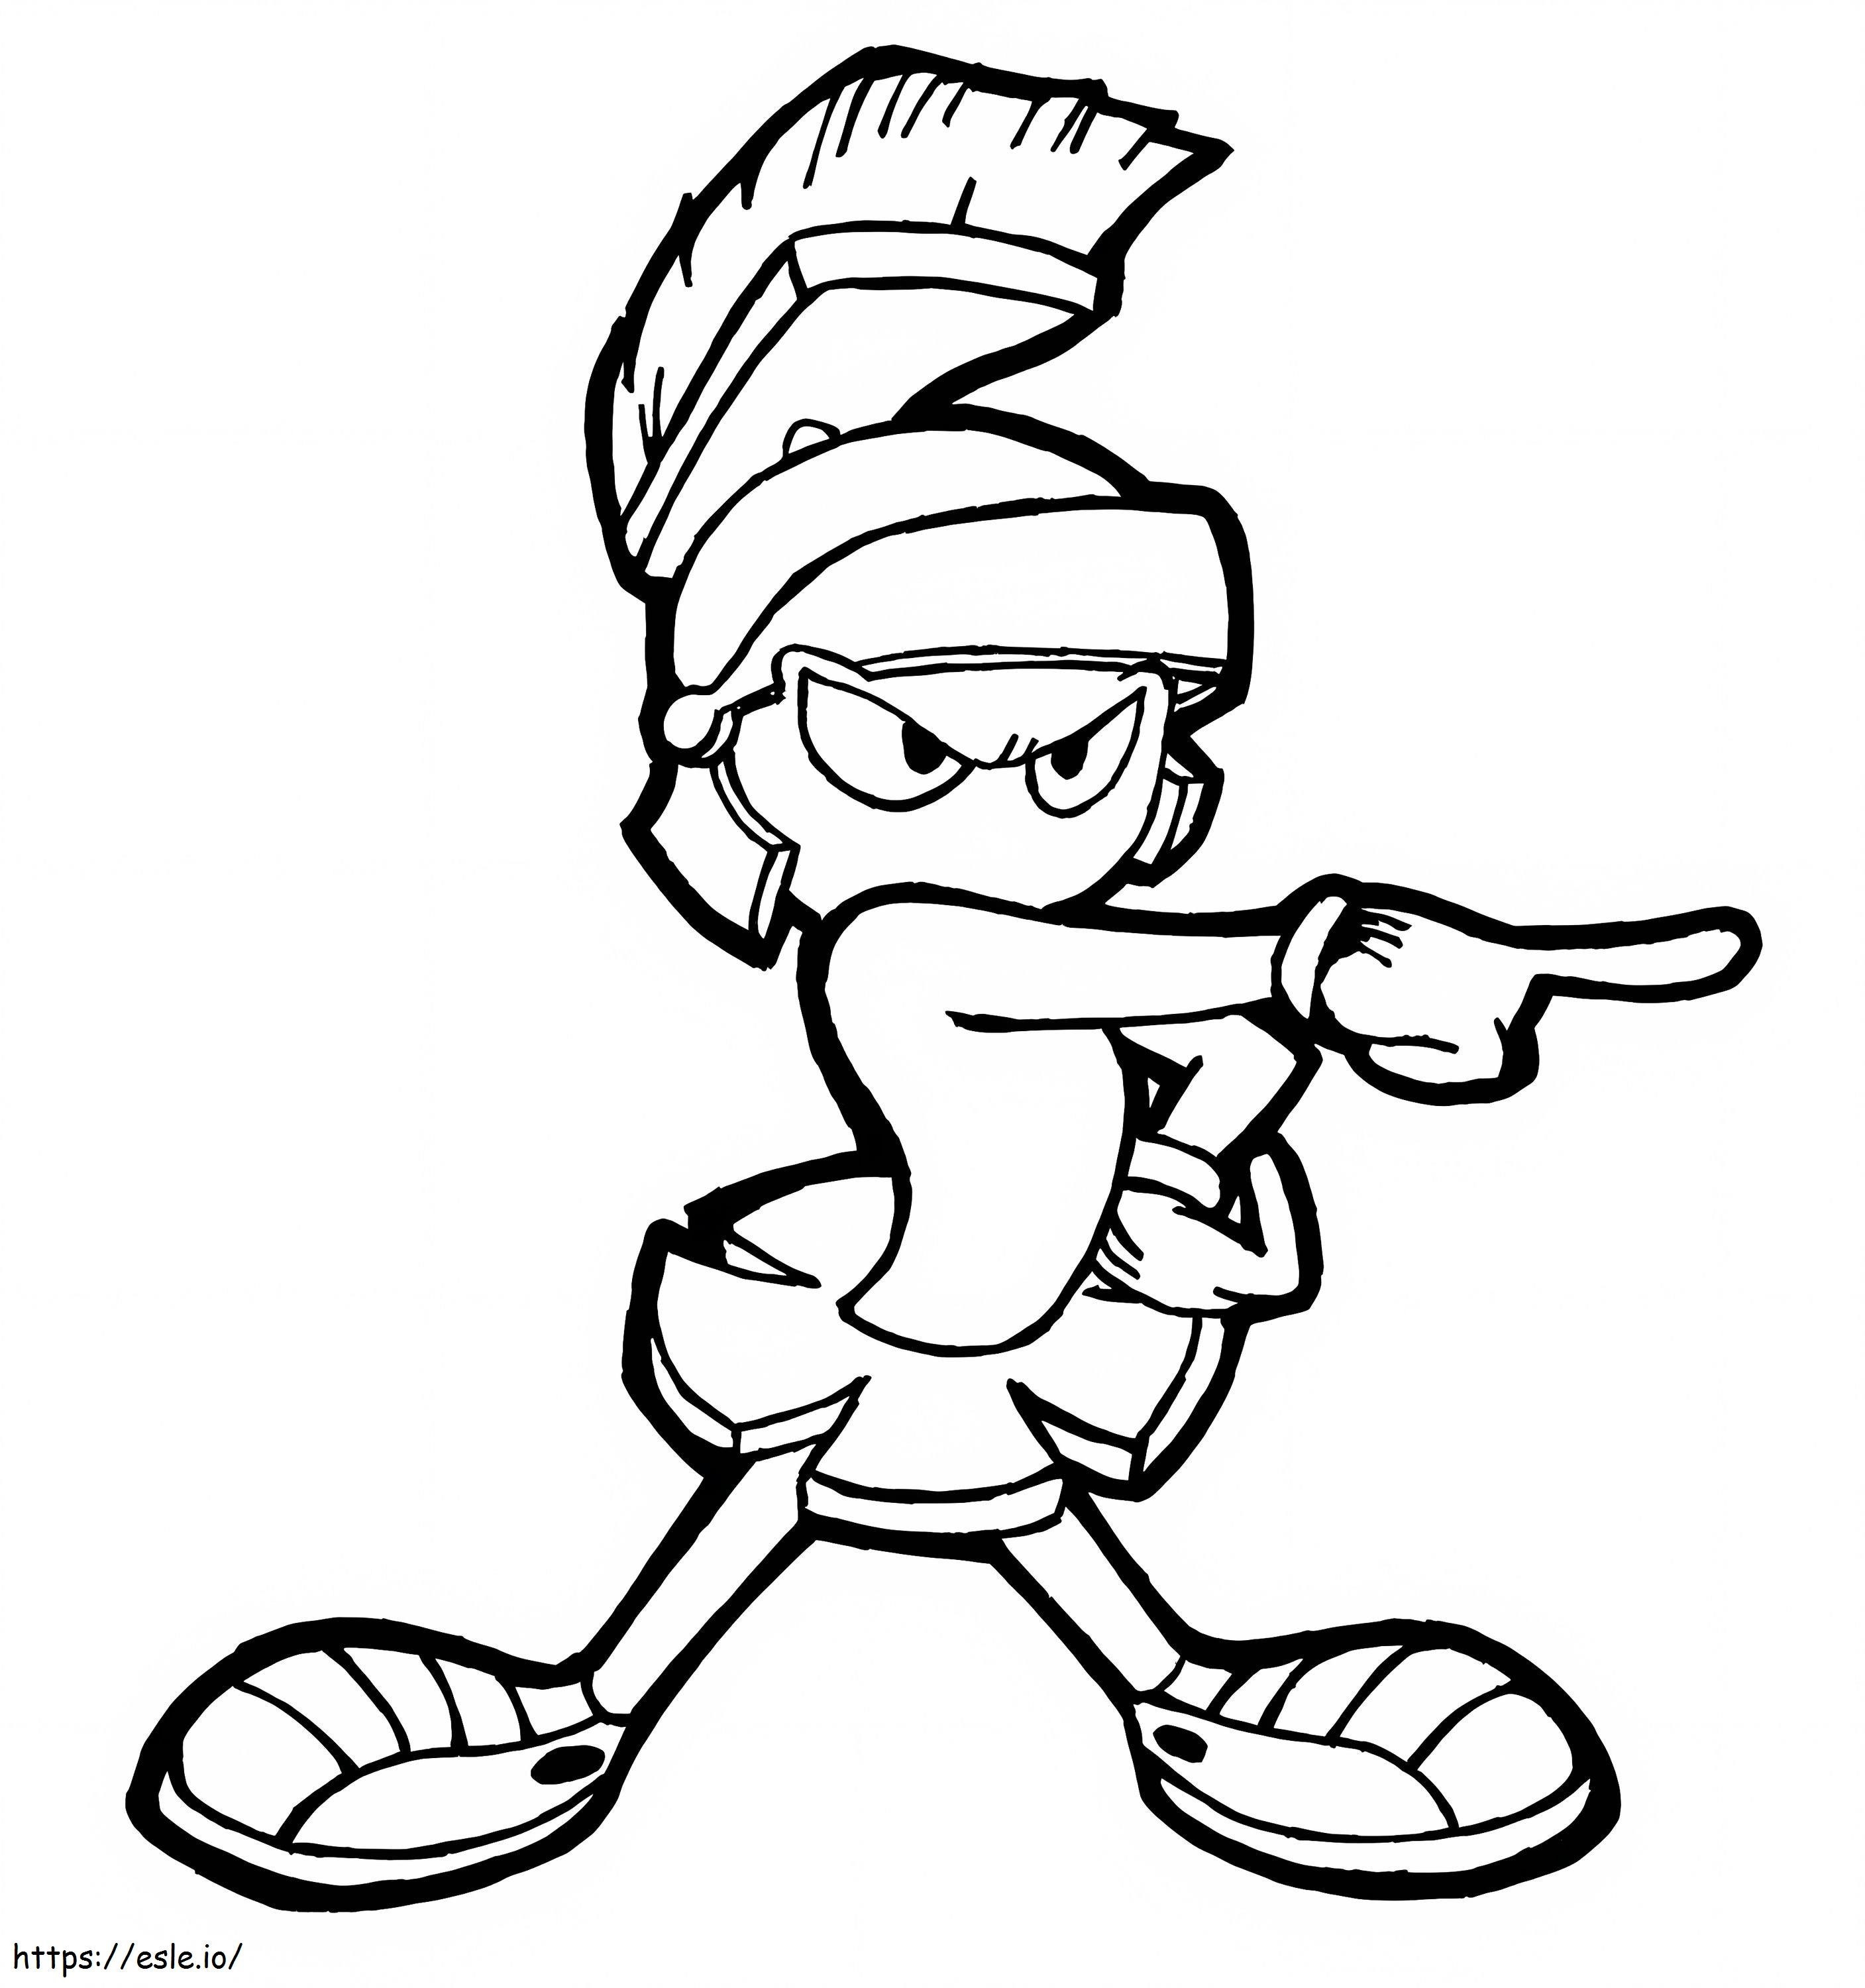 Marvin The Martian 8 coloring page